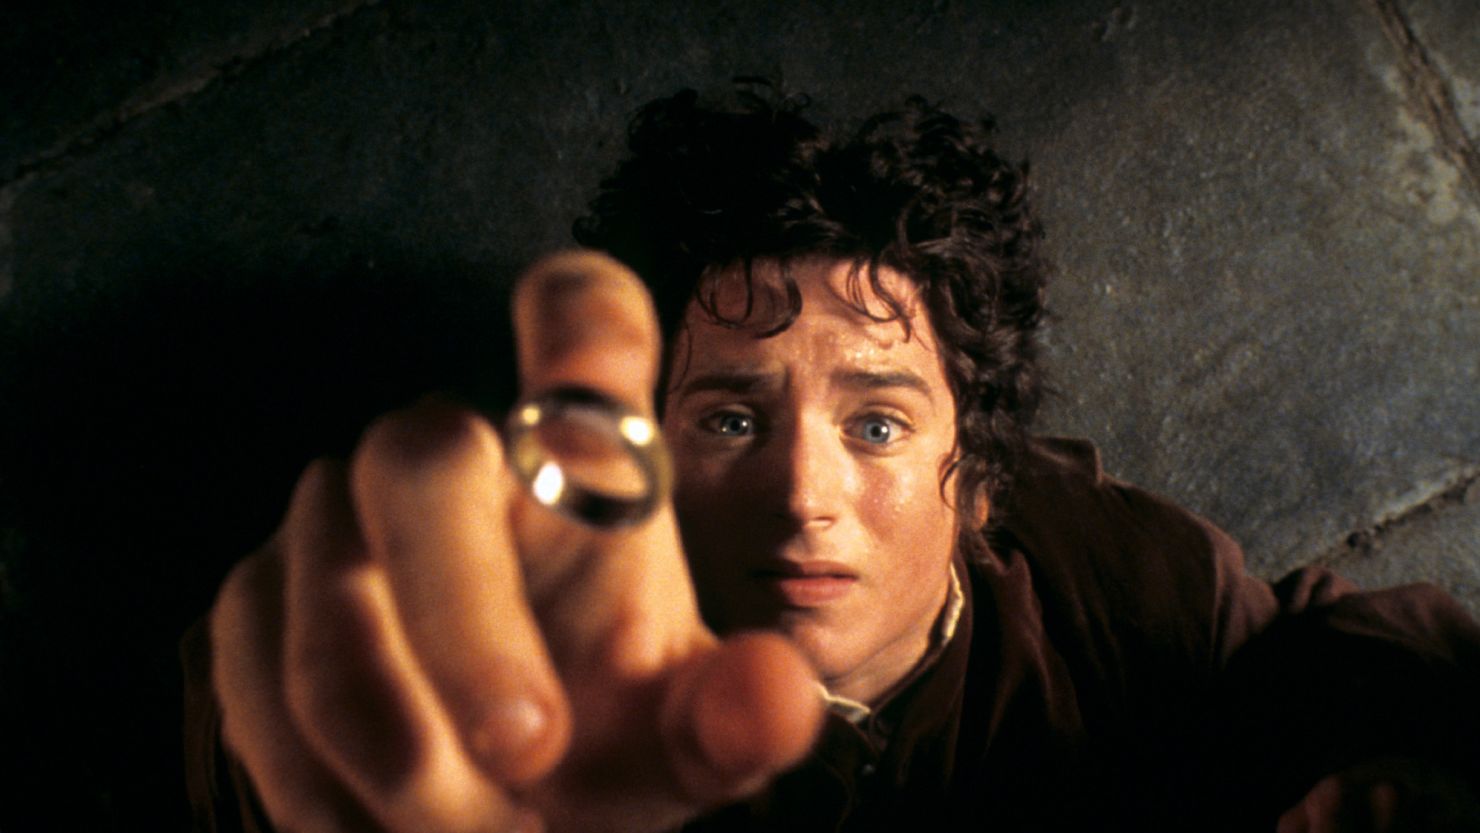 Elijah Wood starred as Frodo Baggins in the "Lord of the Rings" movie trilogy.